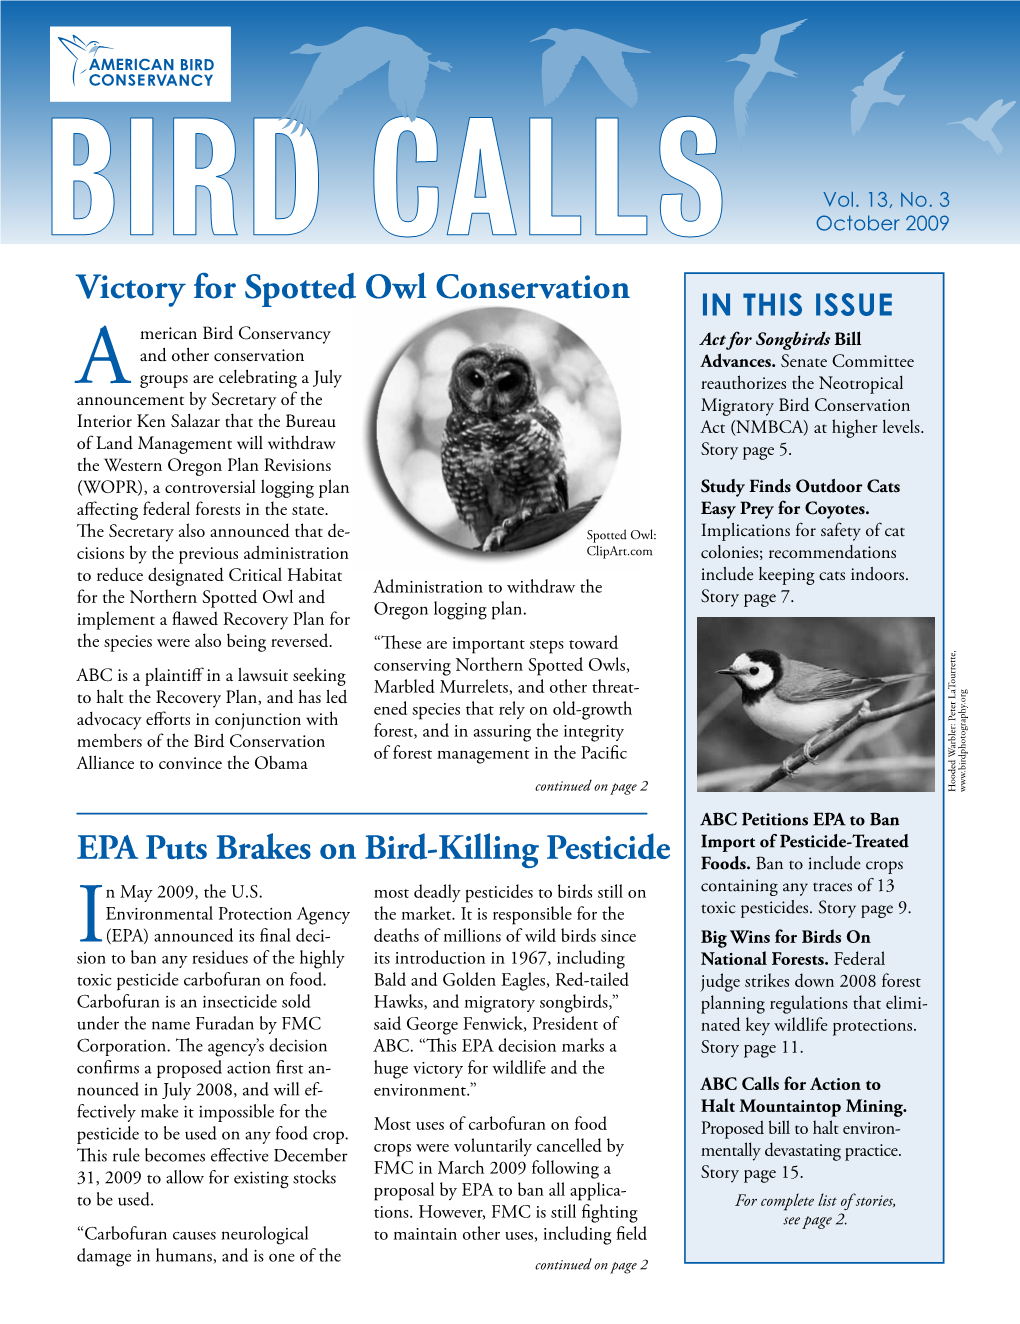 EPA Puts Brakes on Bird-Killing Pesticide Victory for Spotted Owl